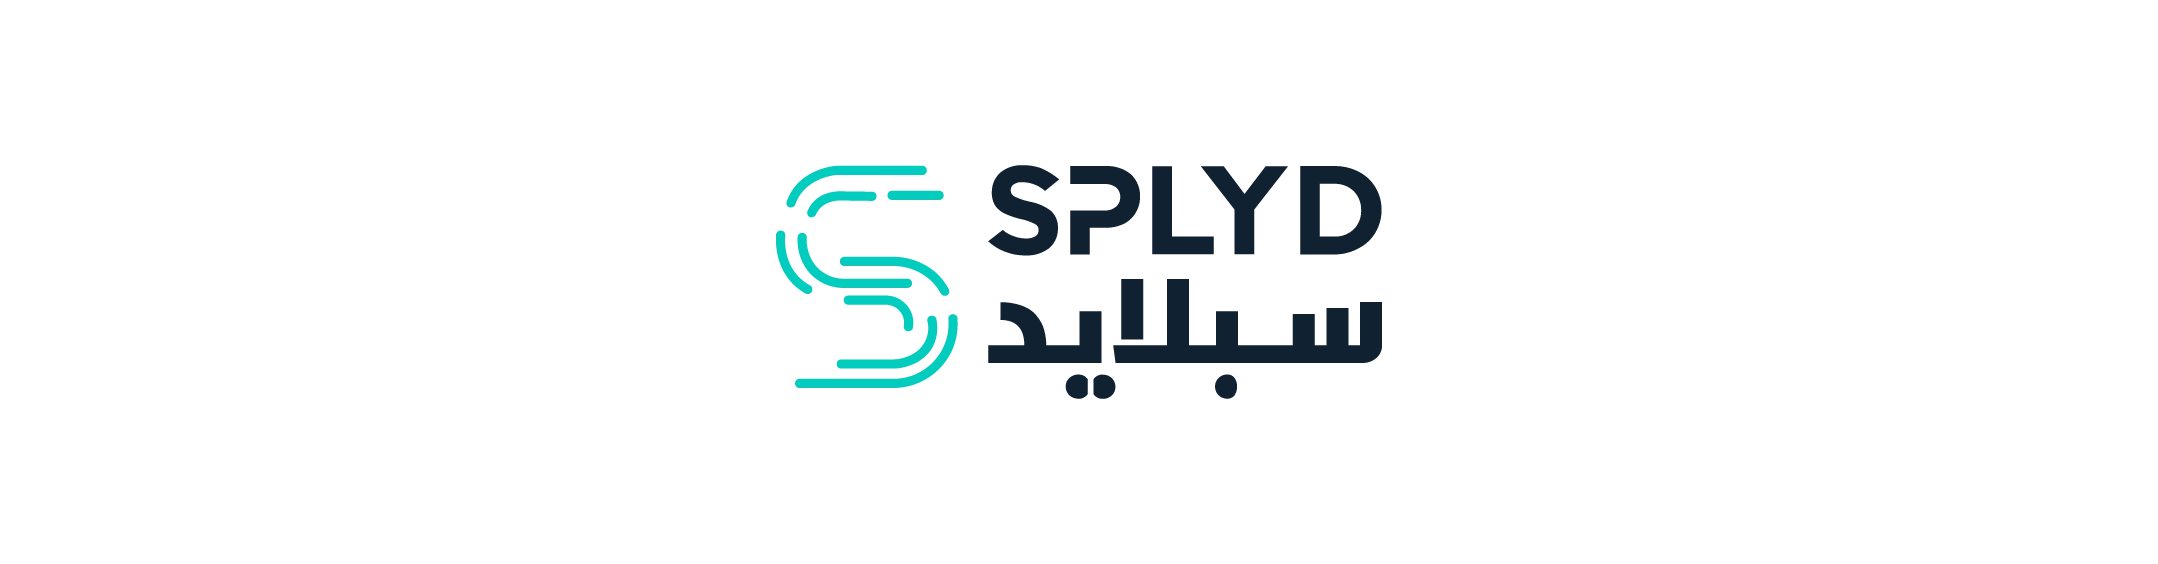 Splyd